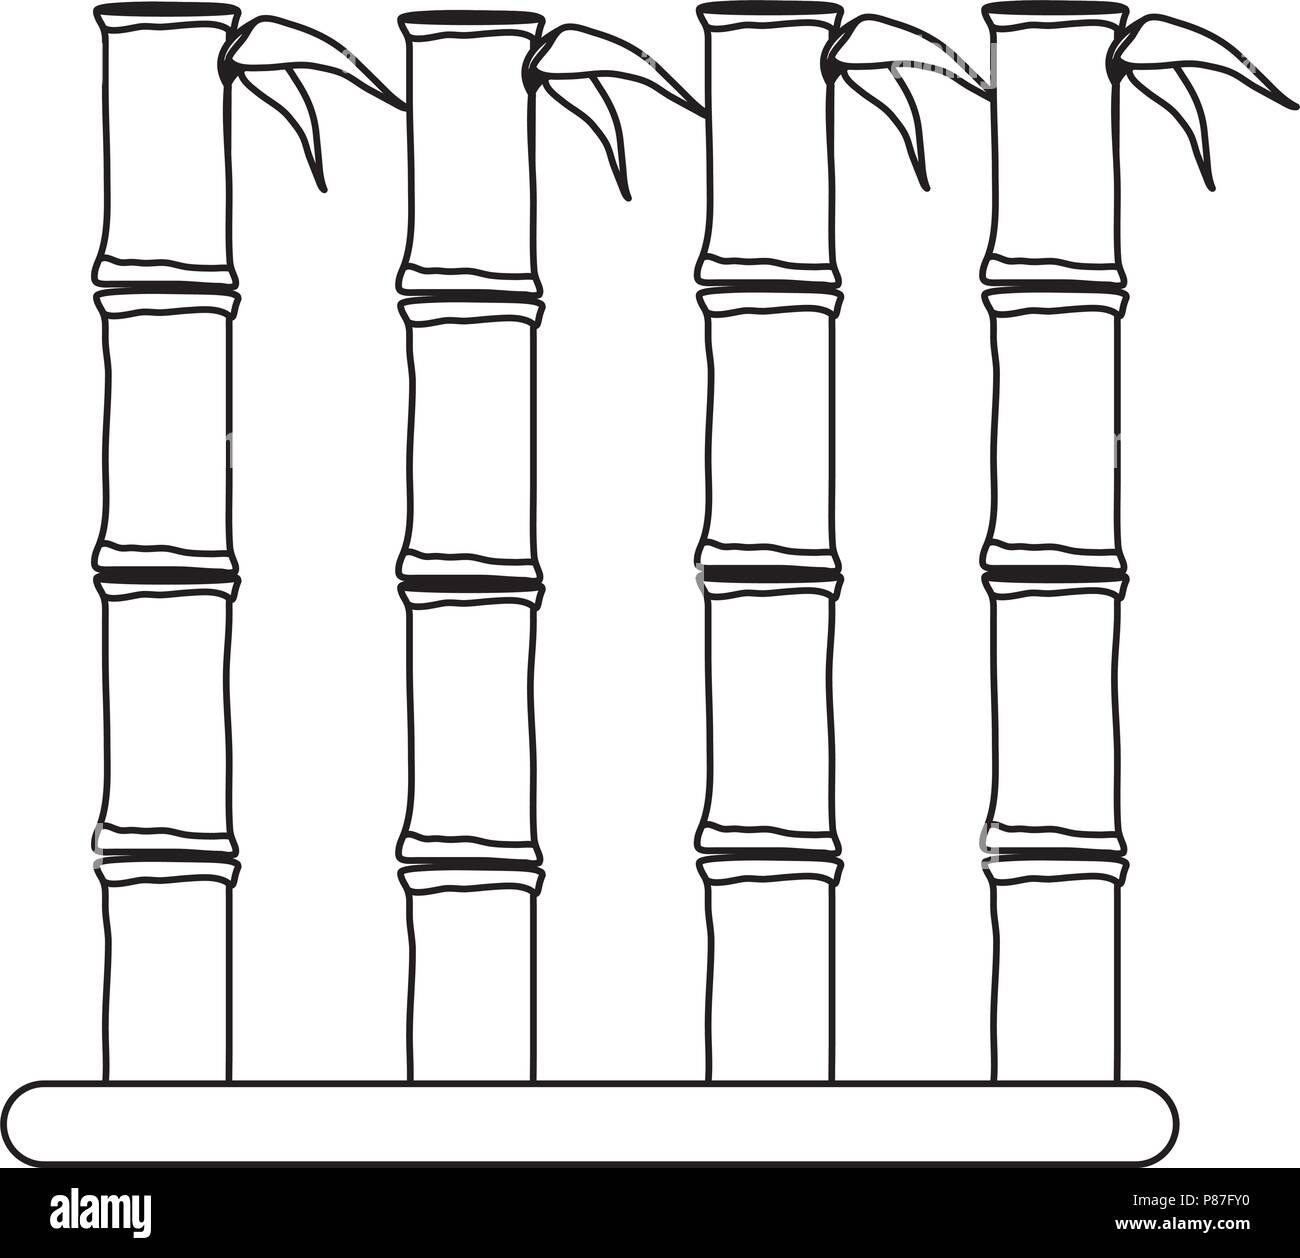 Bamboo Sticks Vector Images (over 5,100)